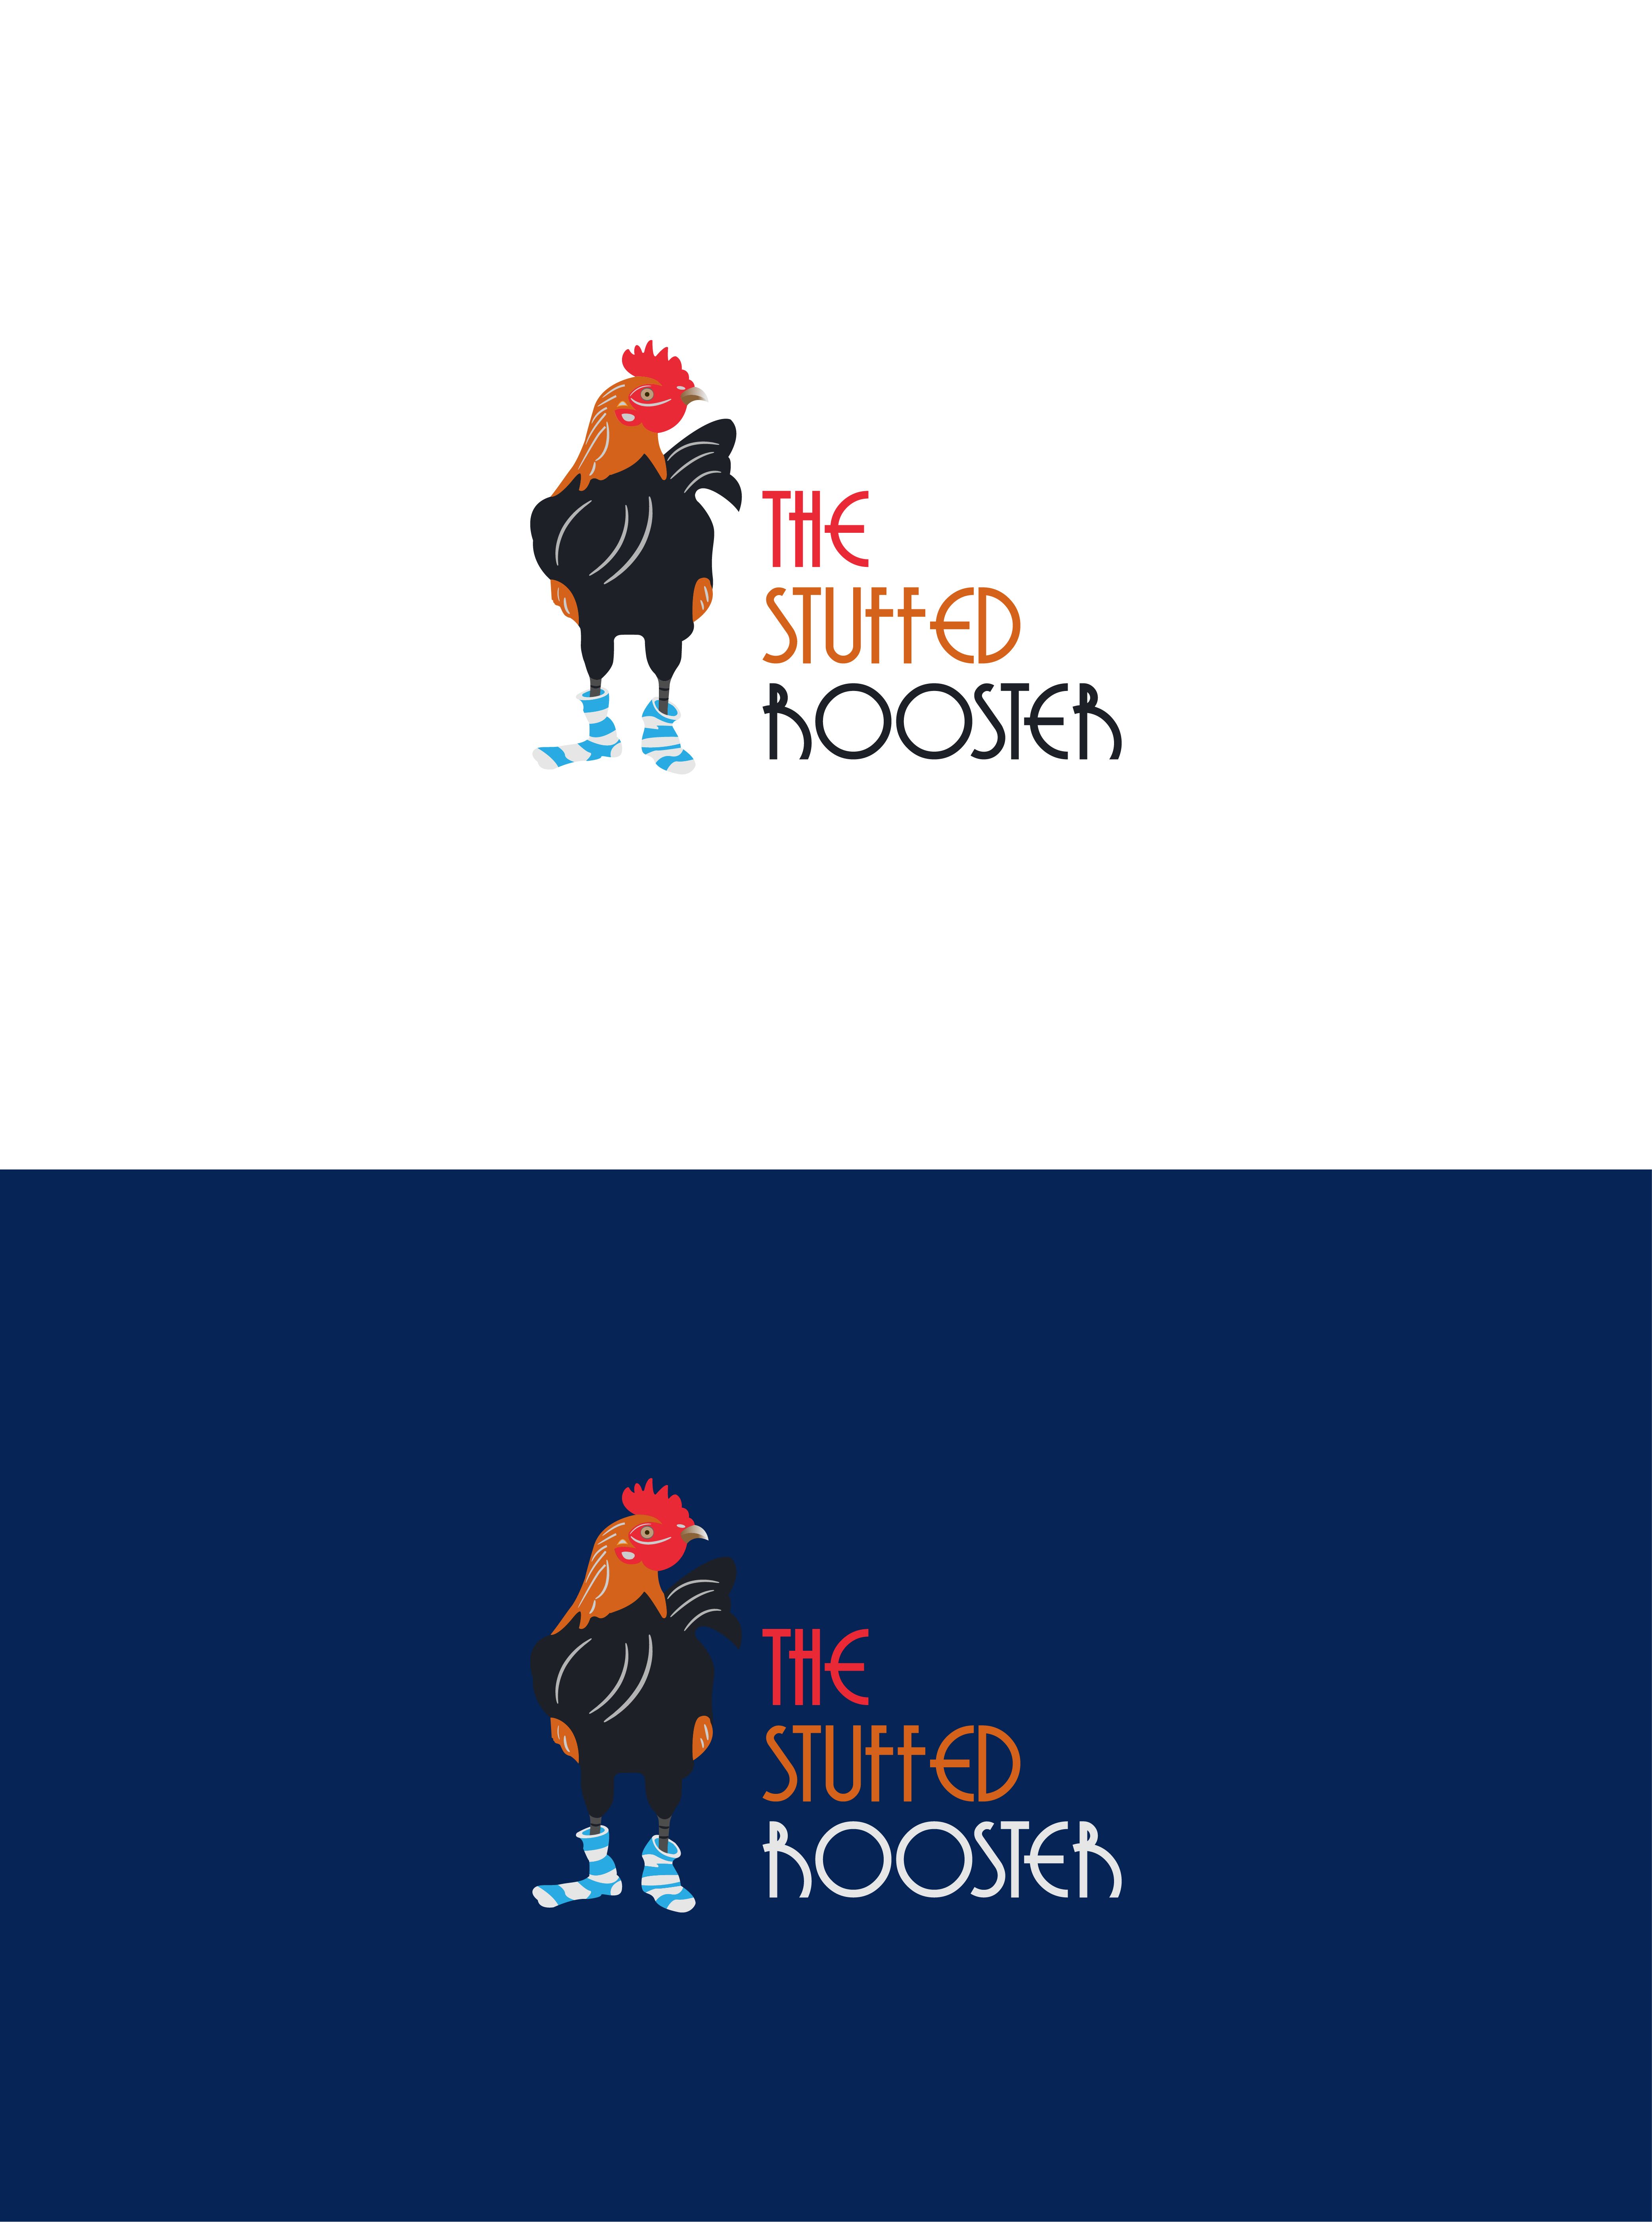 Blue Rooster Restaurant Logo - The Stuffed Rooster #Restaurant #Logo_Design | Logo Design ...